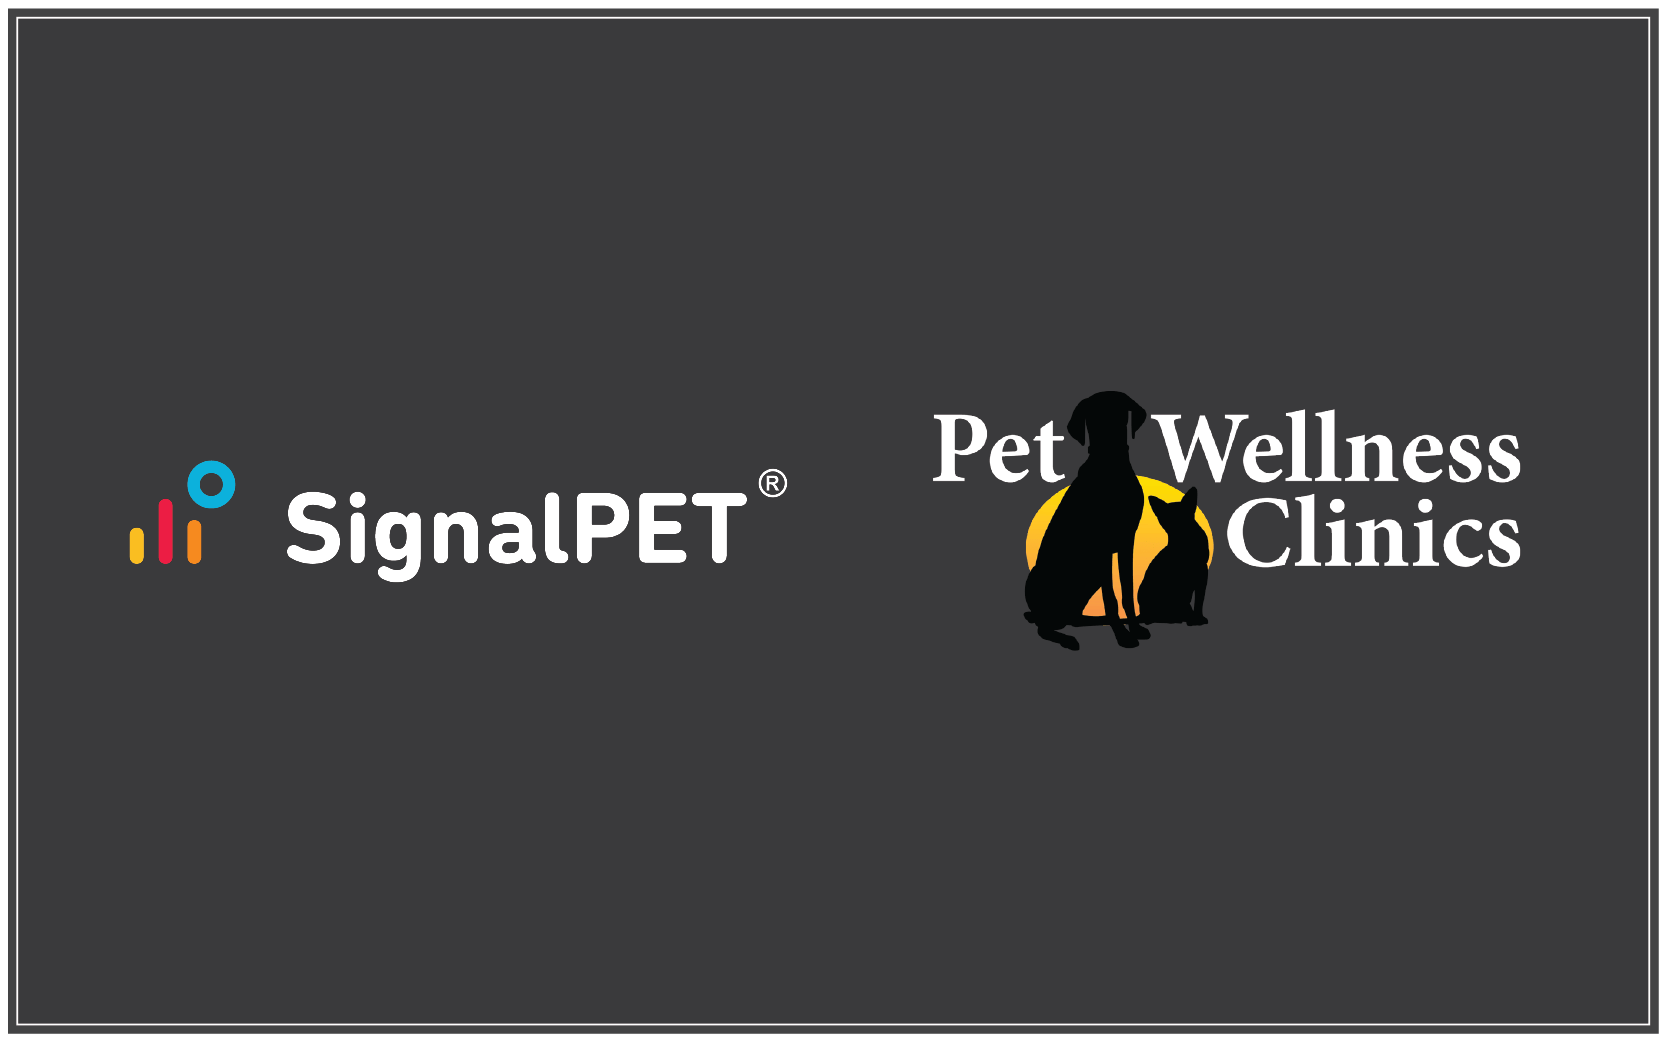 PWC Partners with SignalPET to Offer Advanced Veterinary Technology powered by AI